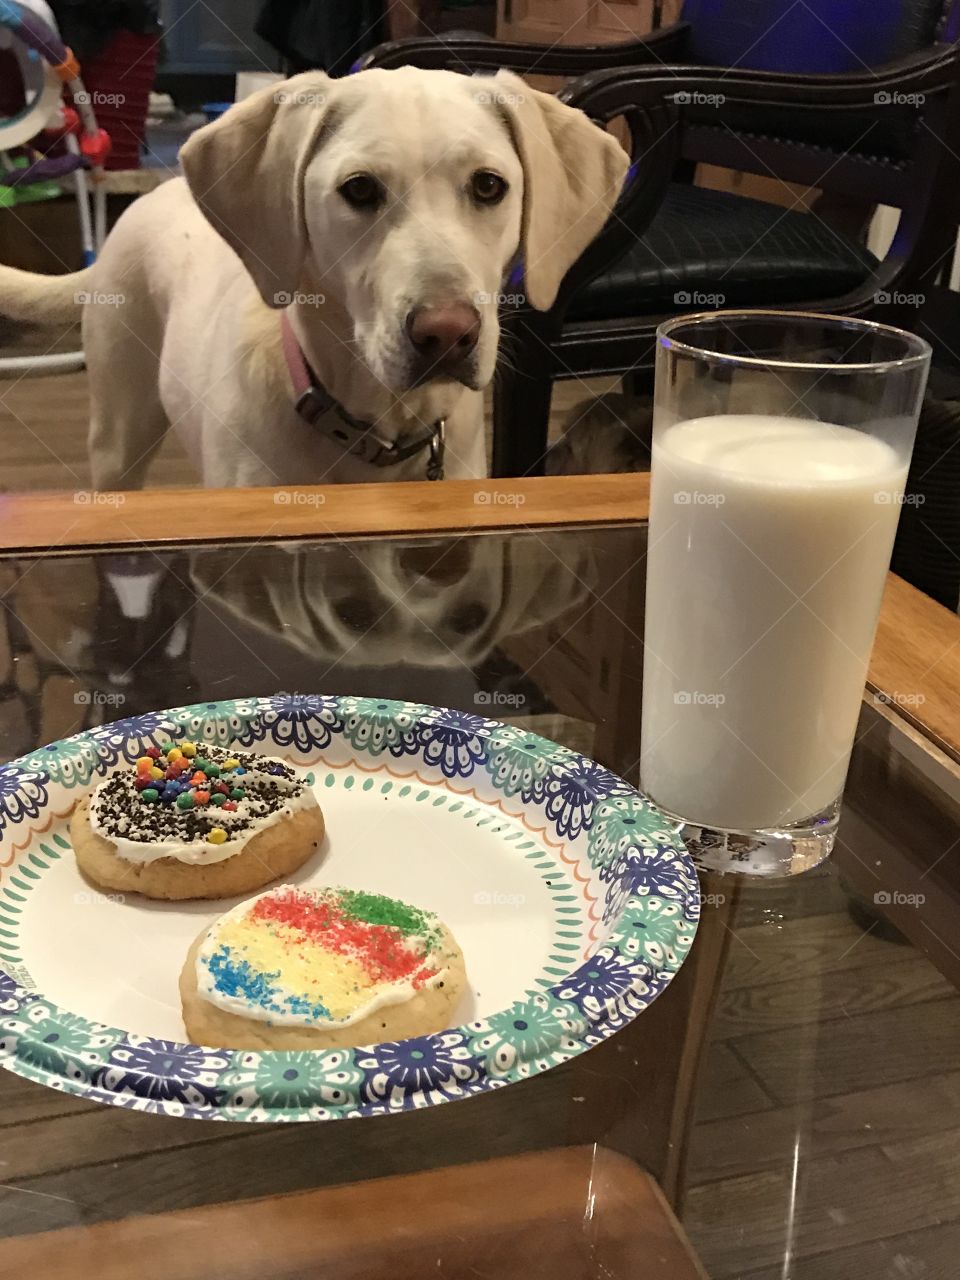 She wants the cookies